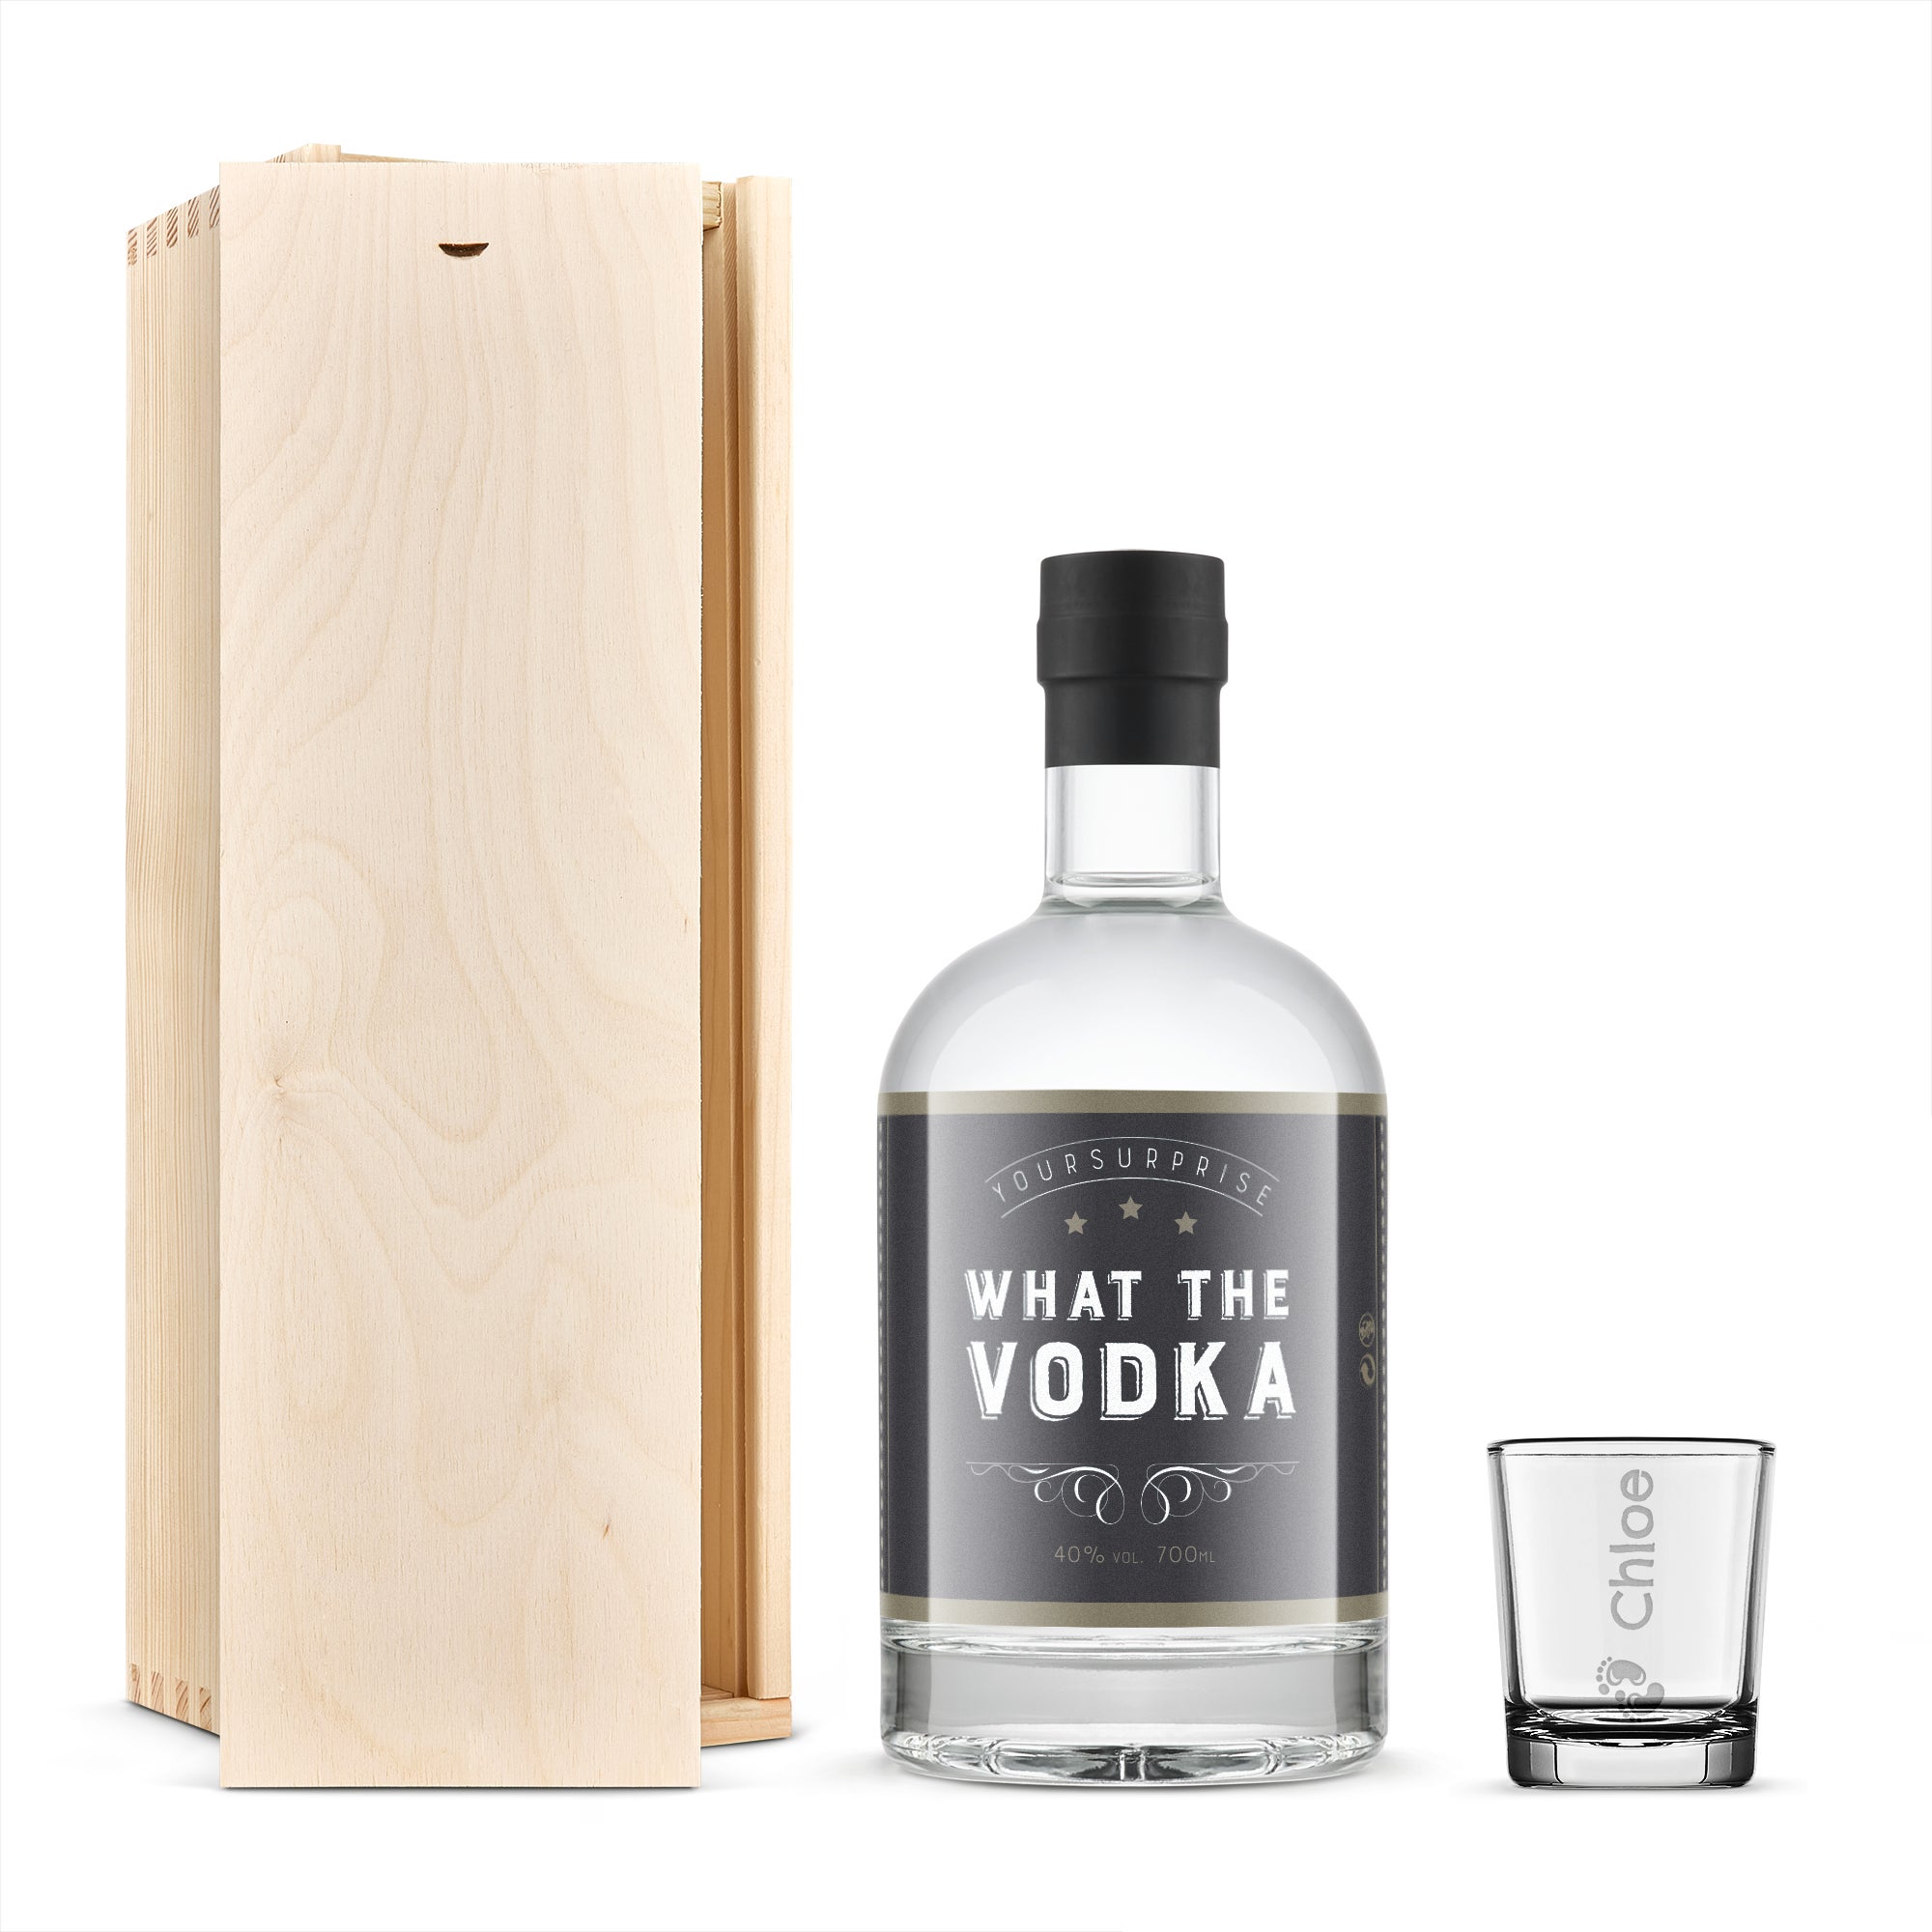 Personalised vodka gift - YourSurprise - Engraved glass